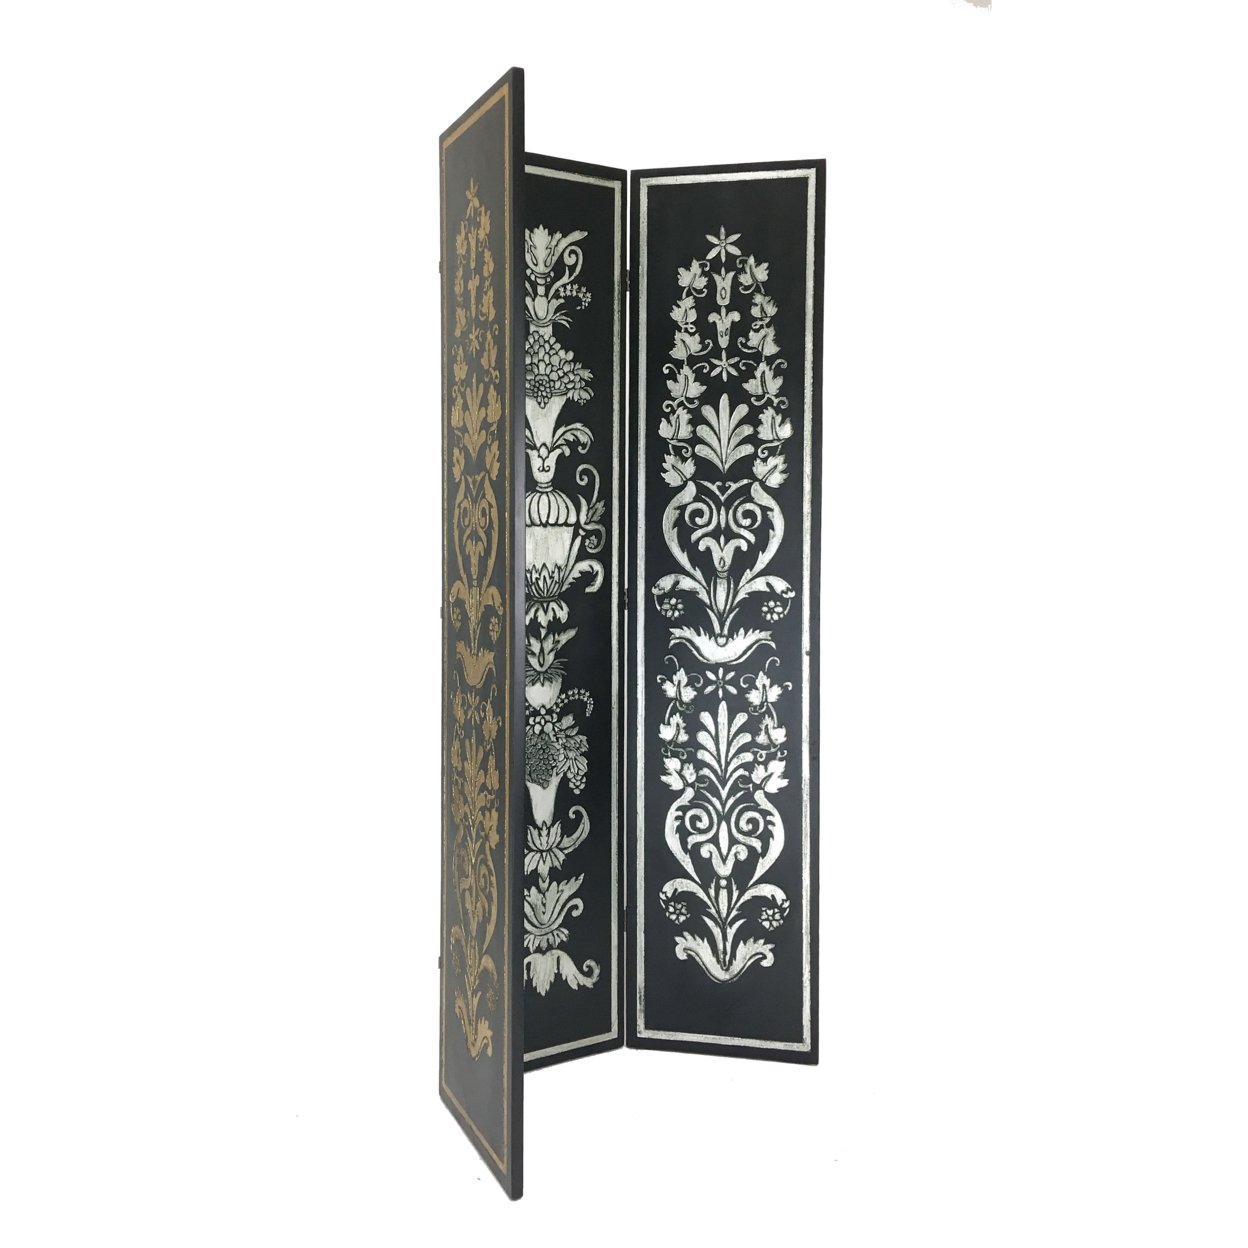 Wooden Double Sided 3 Panel Room Divider With Motifs, Multicolor- Saltoro Sherpi